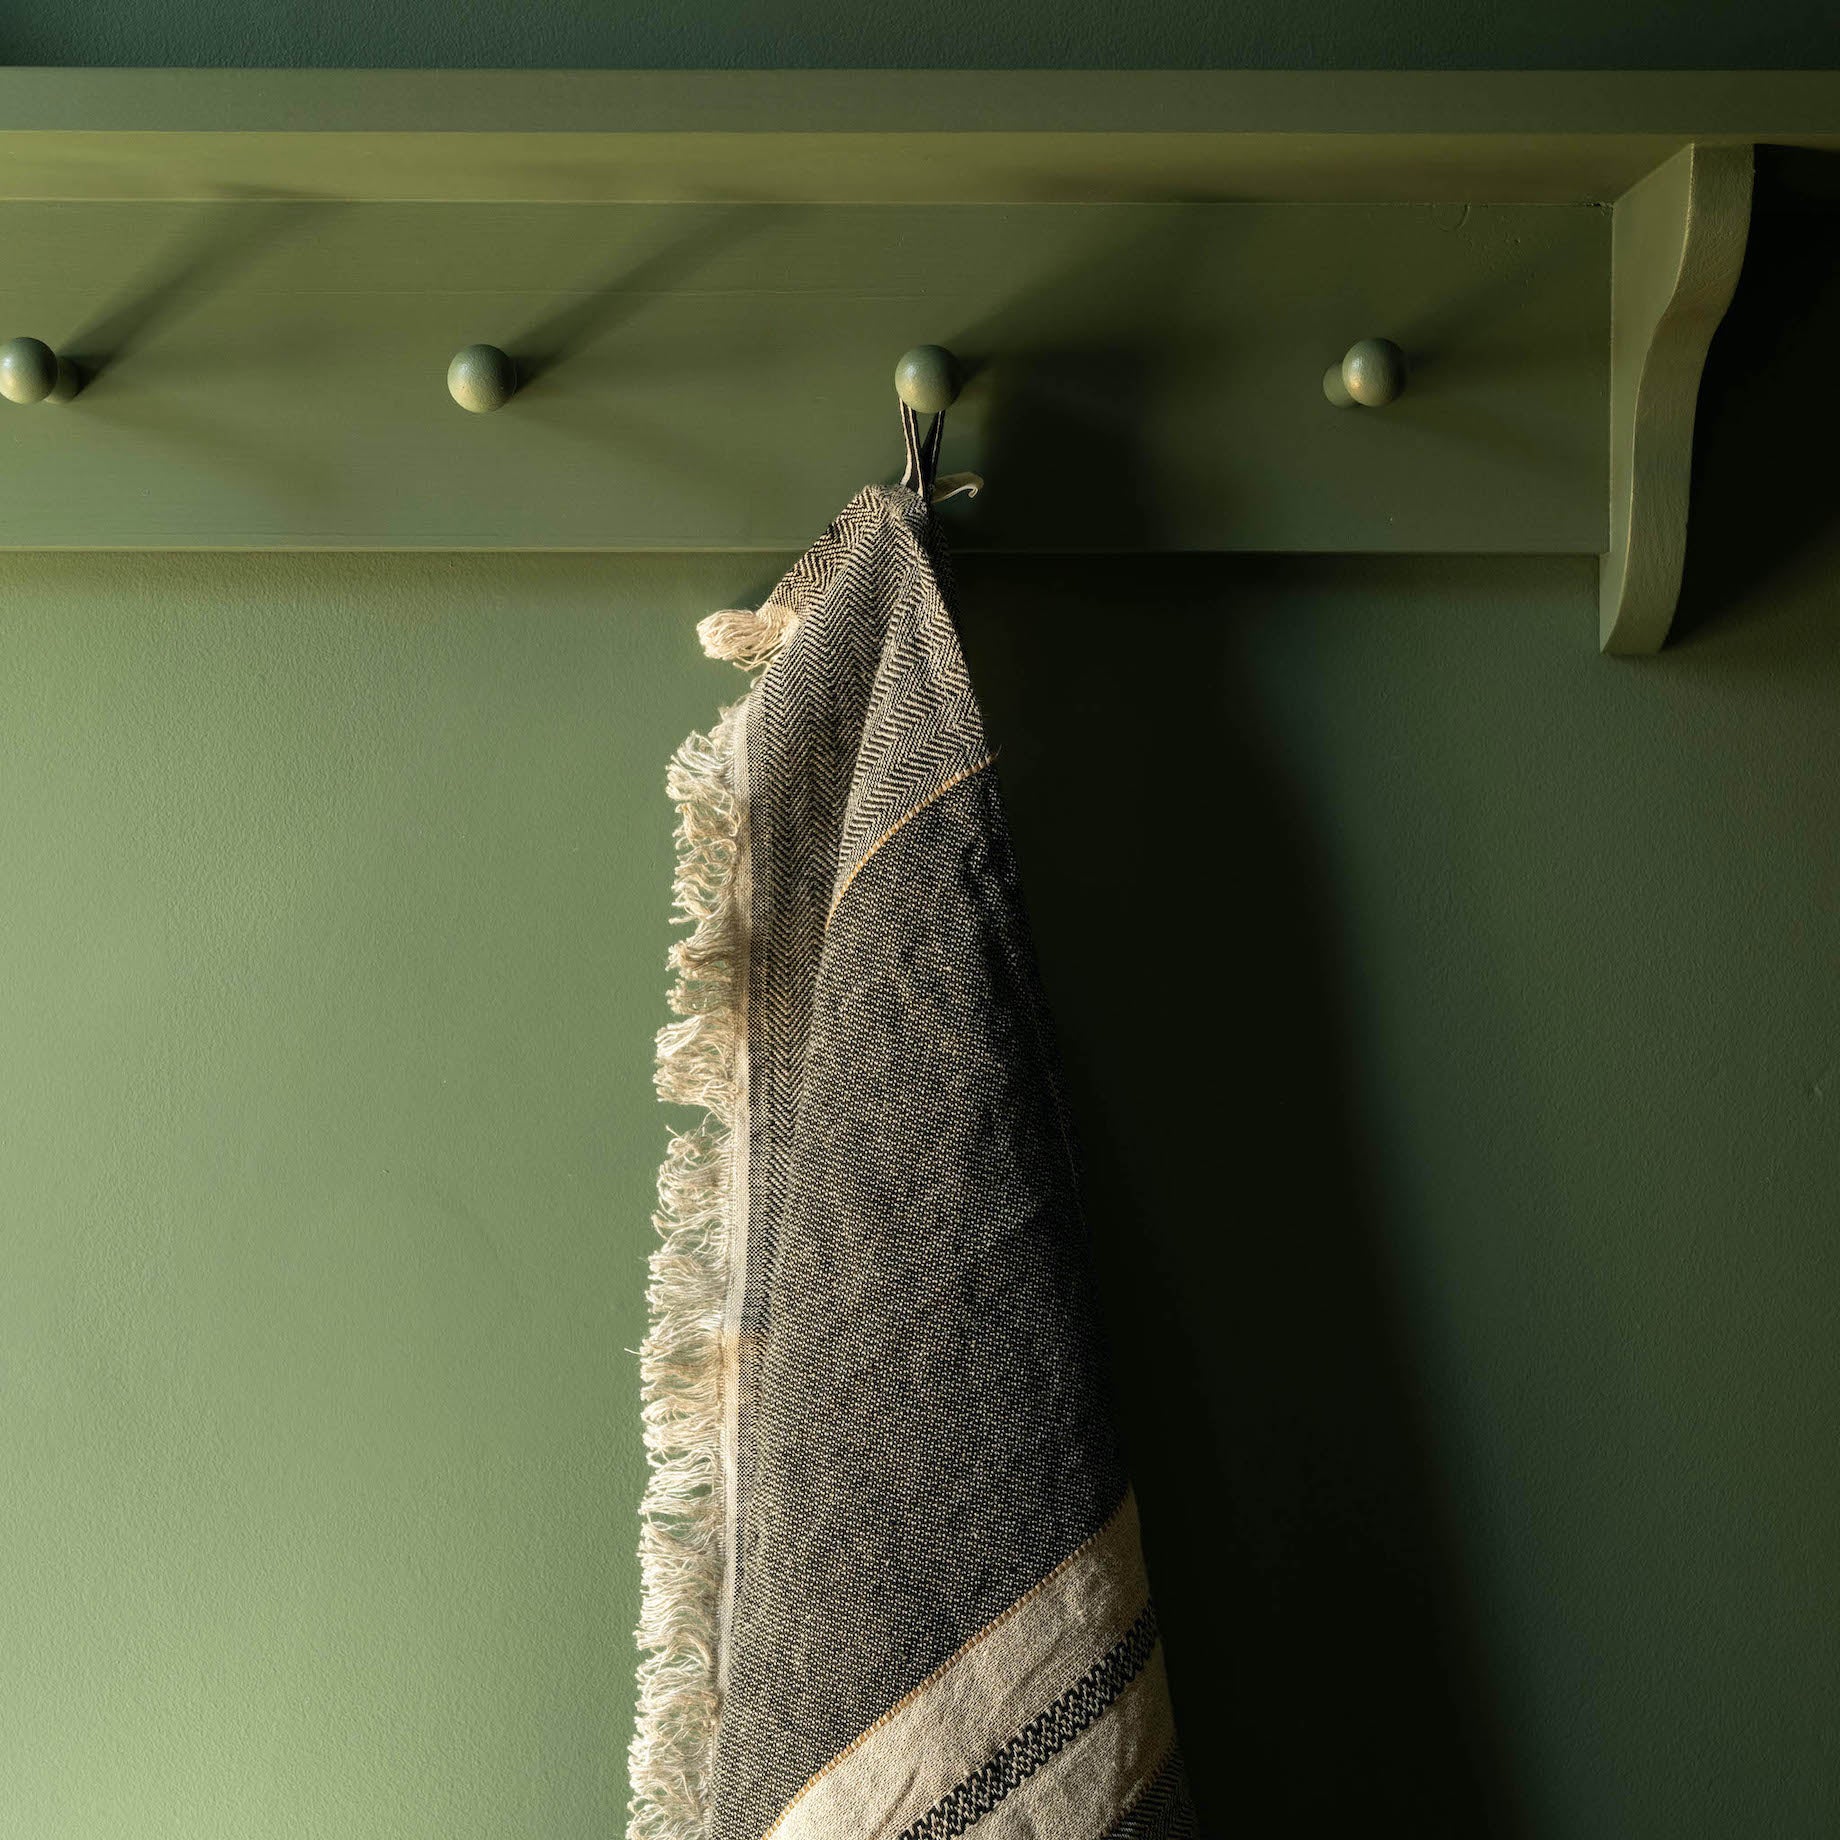 Libeco Belgian Linen Guest Towel in Tack Stripe colourway hanging up on peg rail